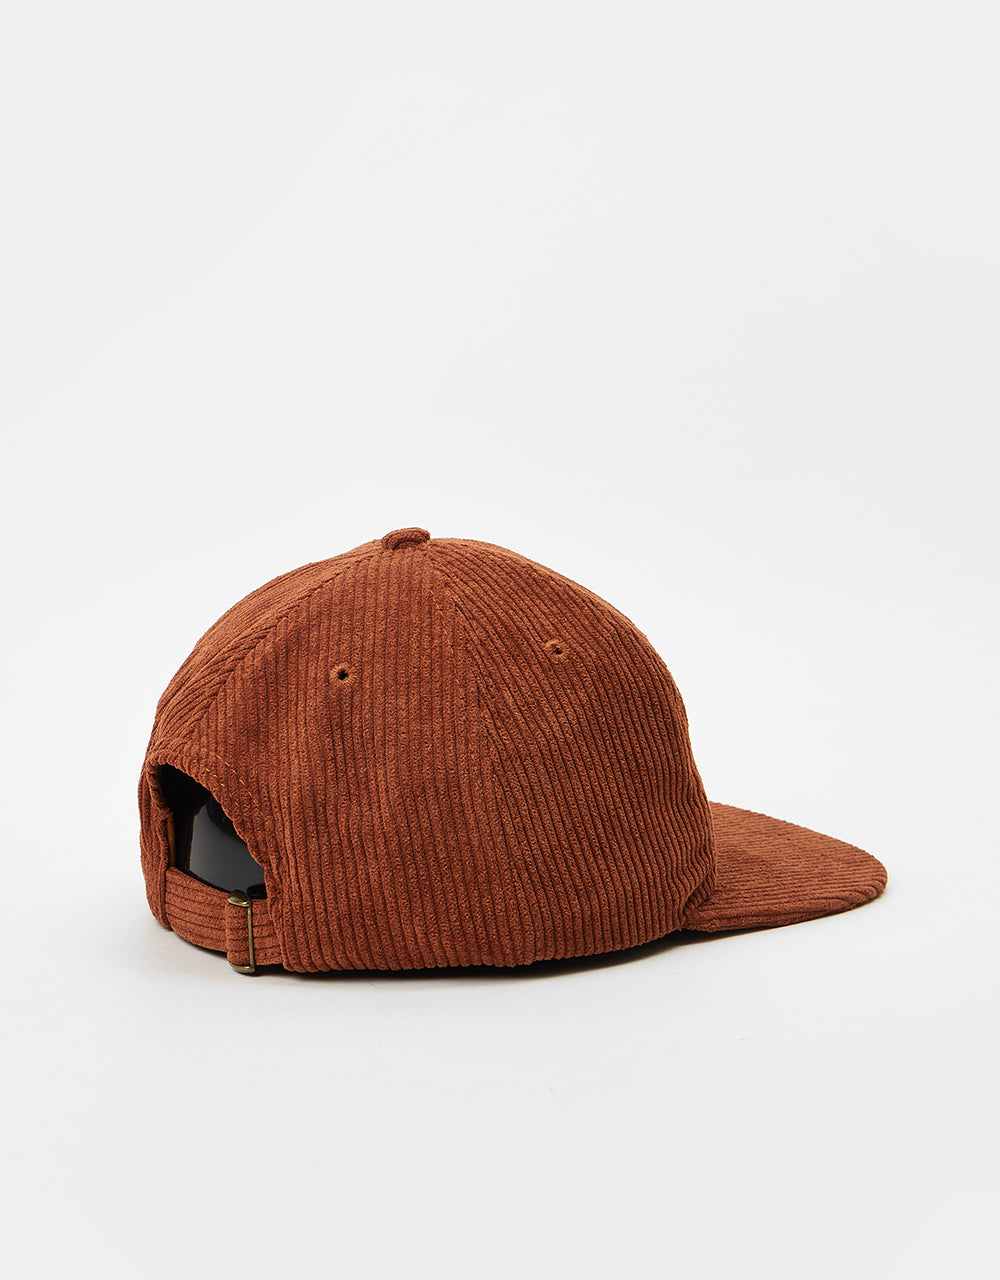 Route One Unstructured Cord 6 Panel Cap - Caramel